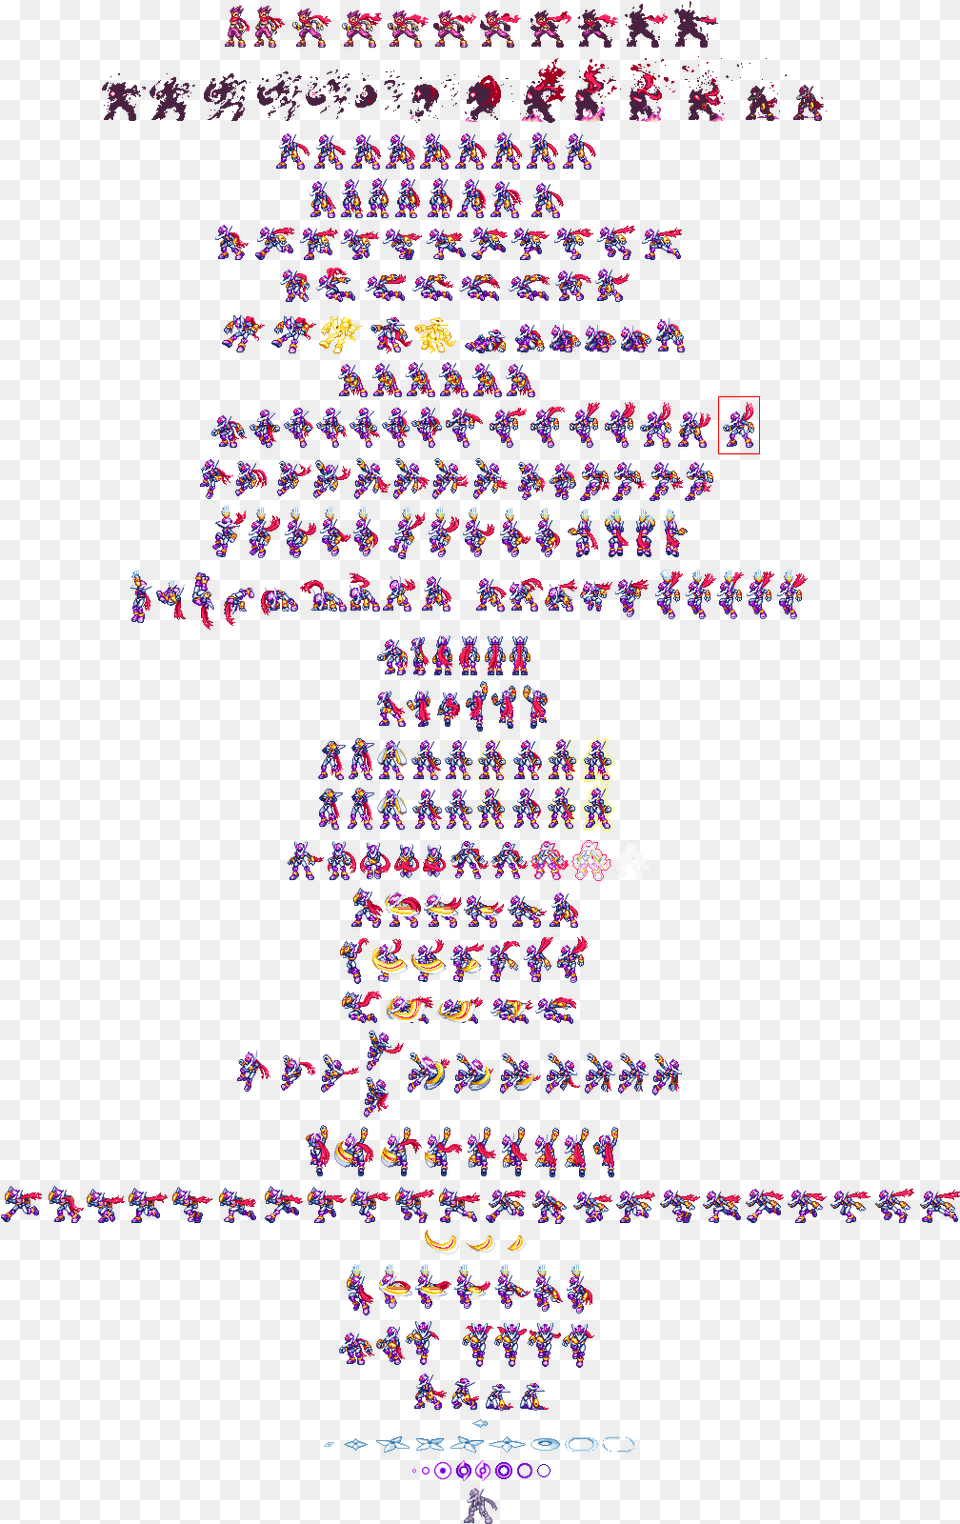 Was A Lazy Andor Forgetful Person And Didnquott Finish Megaman Zx Advent Model A Sprites, Purple, People, Text Png